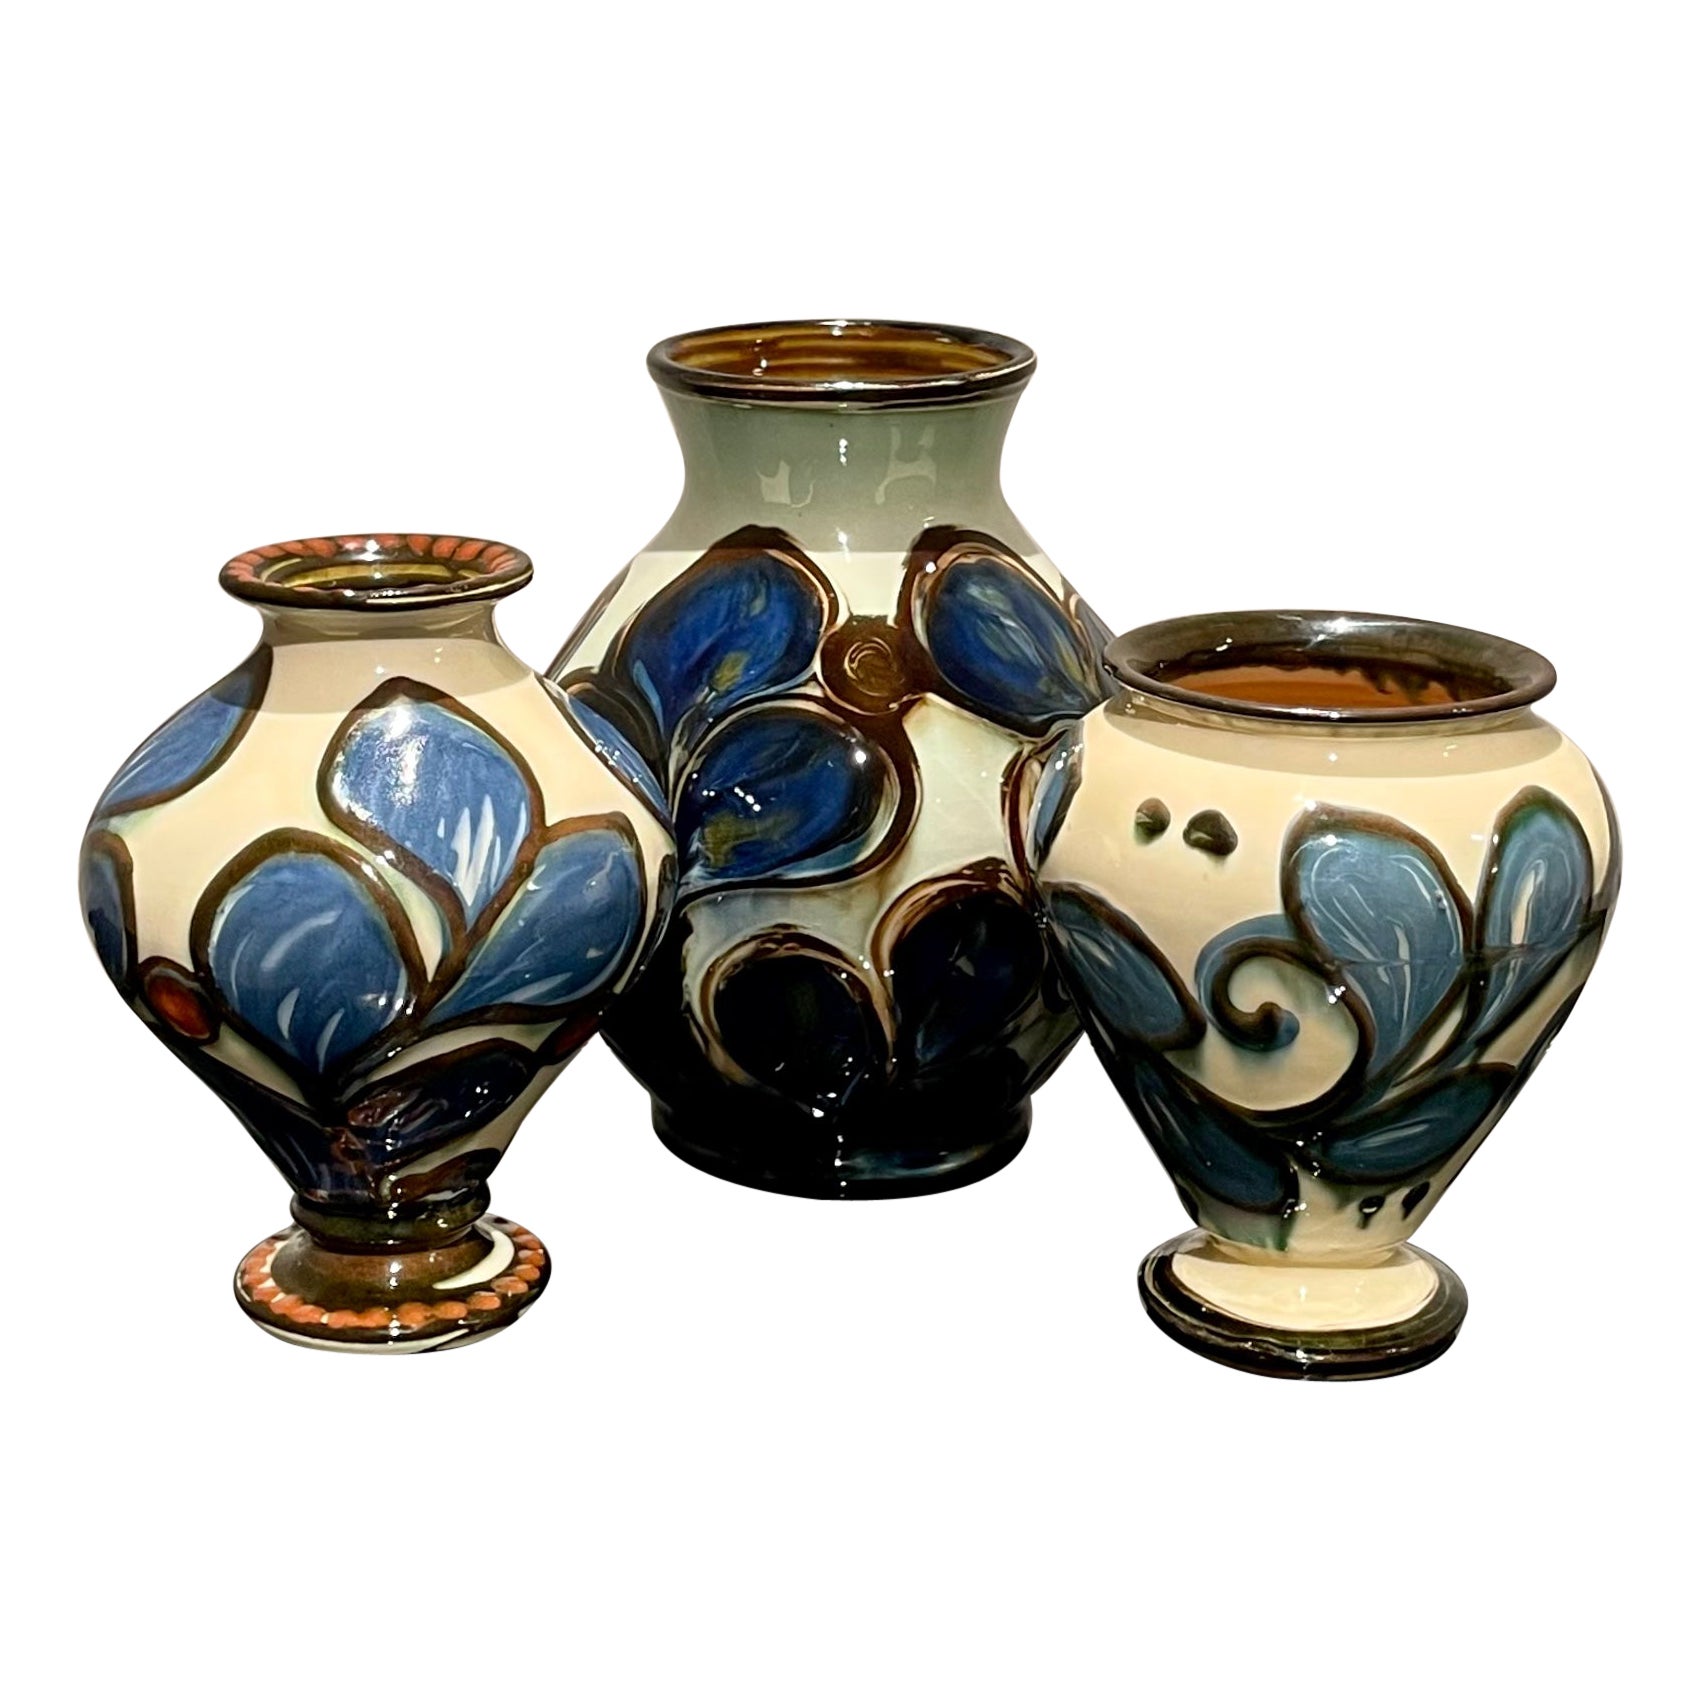 Danish Herman Kähler Ceramic Vase Collection from the 1920s in a Set of Three